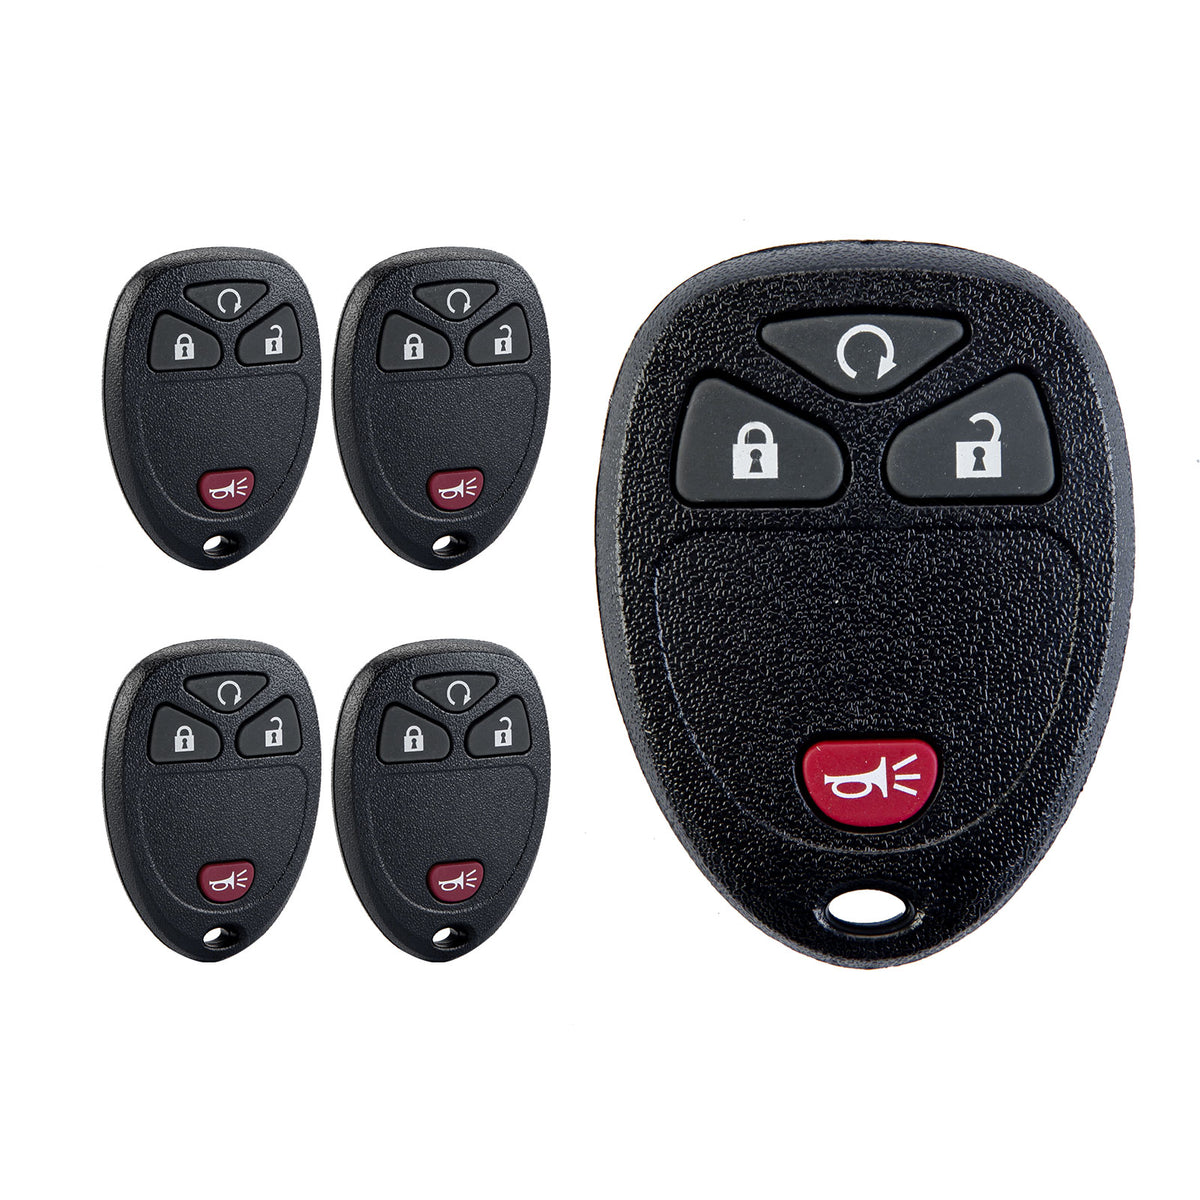 Replacement for 2006-2011 Chevrolet HHR 4 Button Keyless Entry Remote KOBGT04A  KR-C4RE